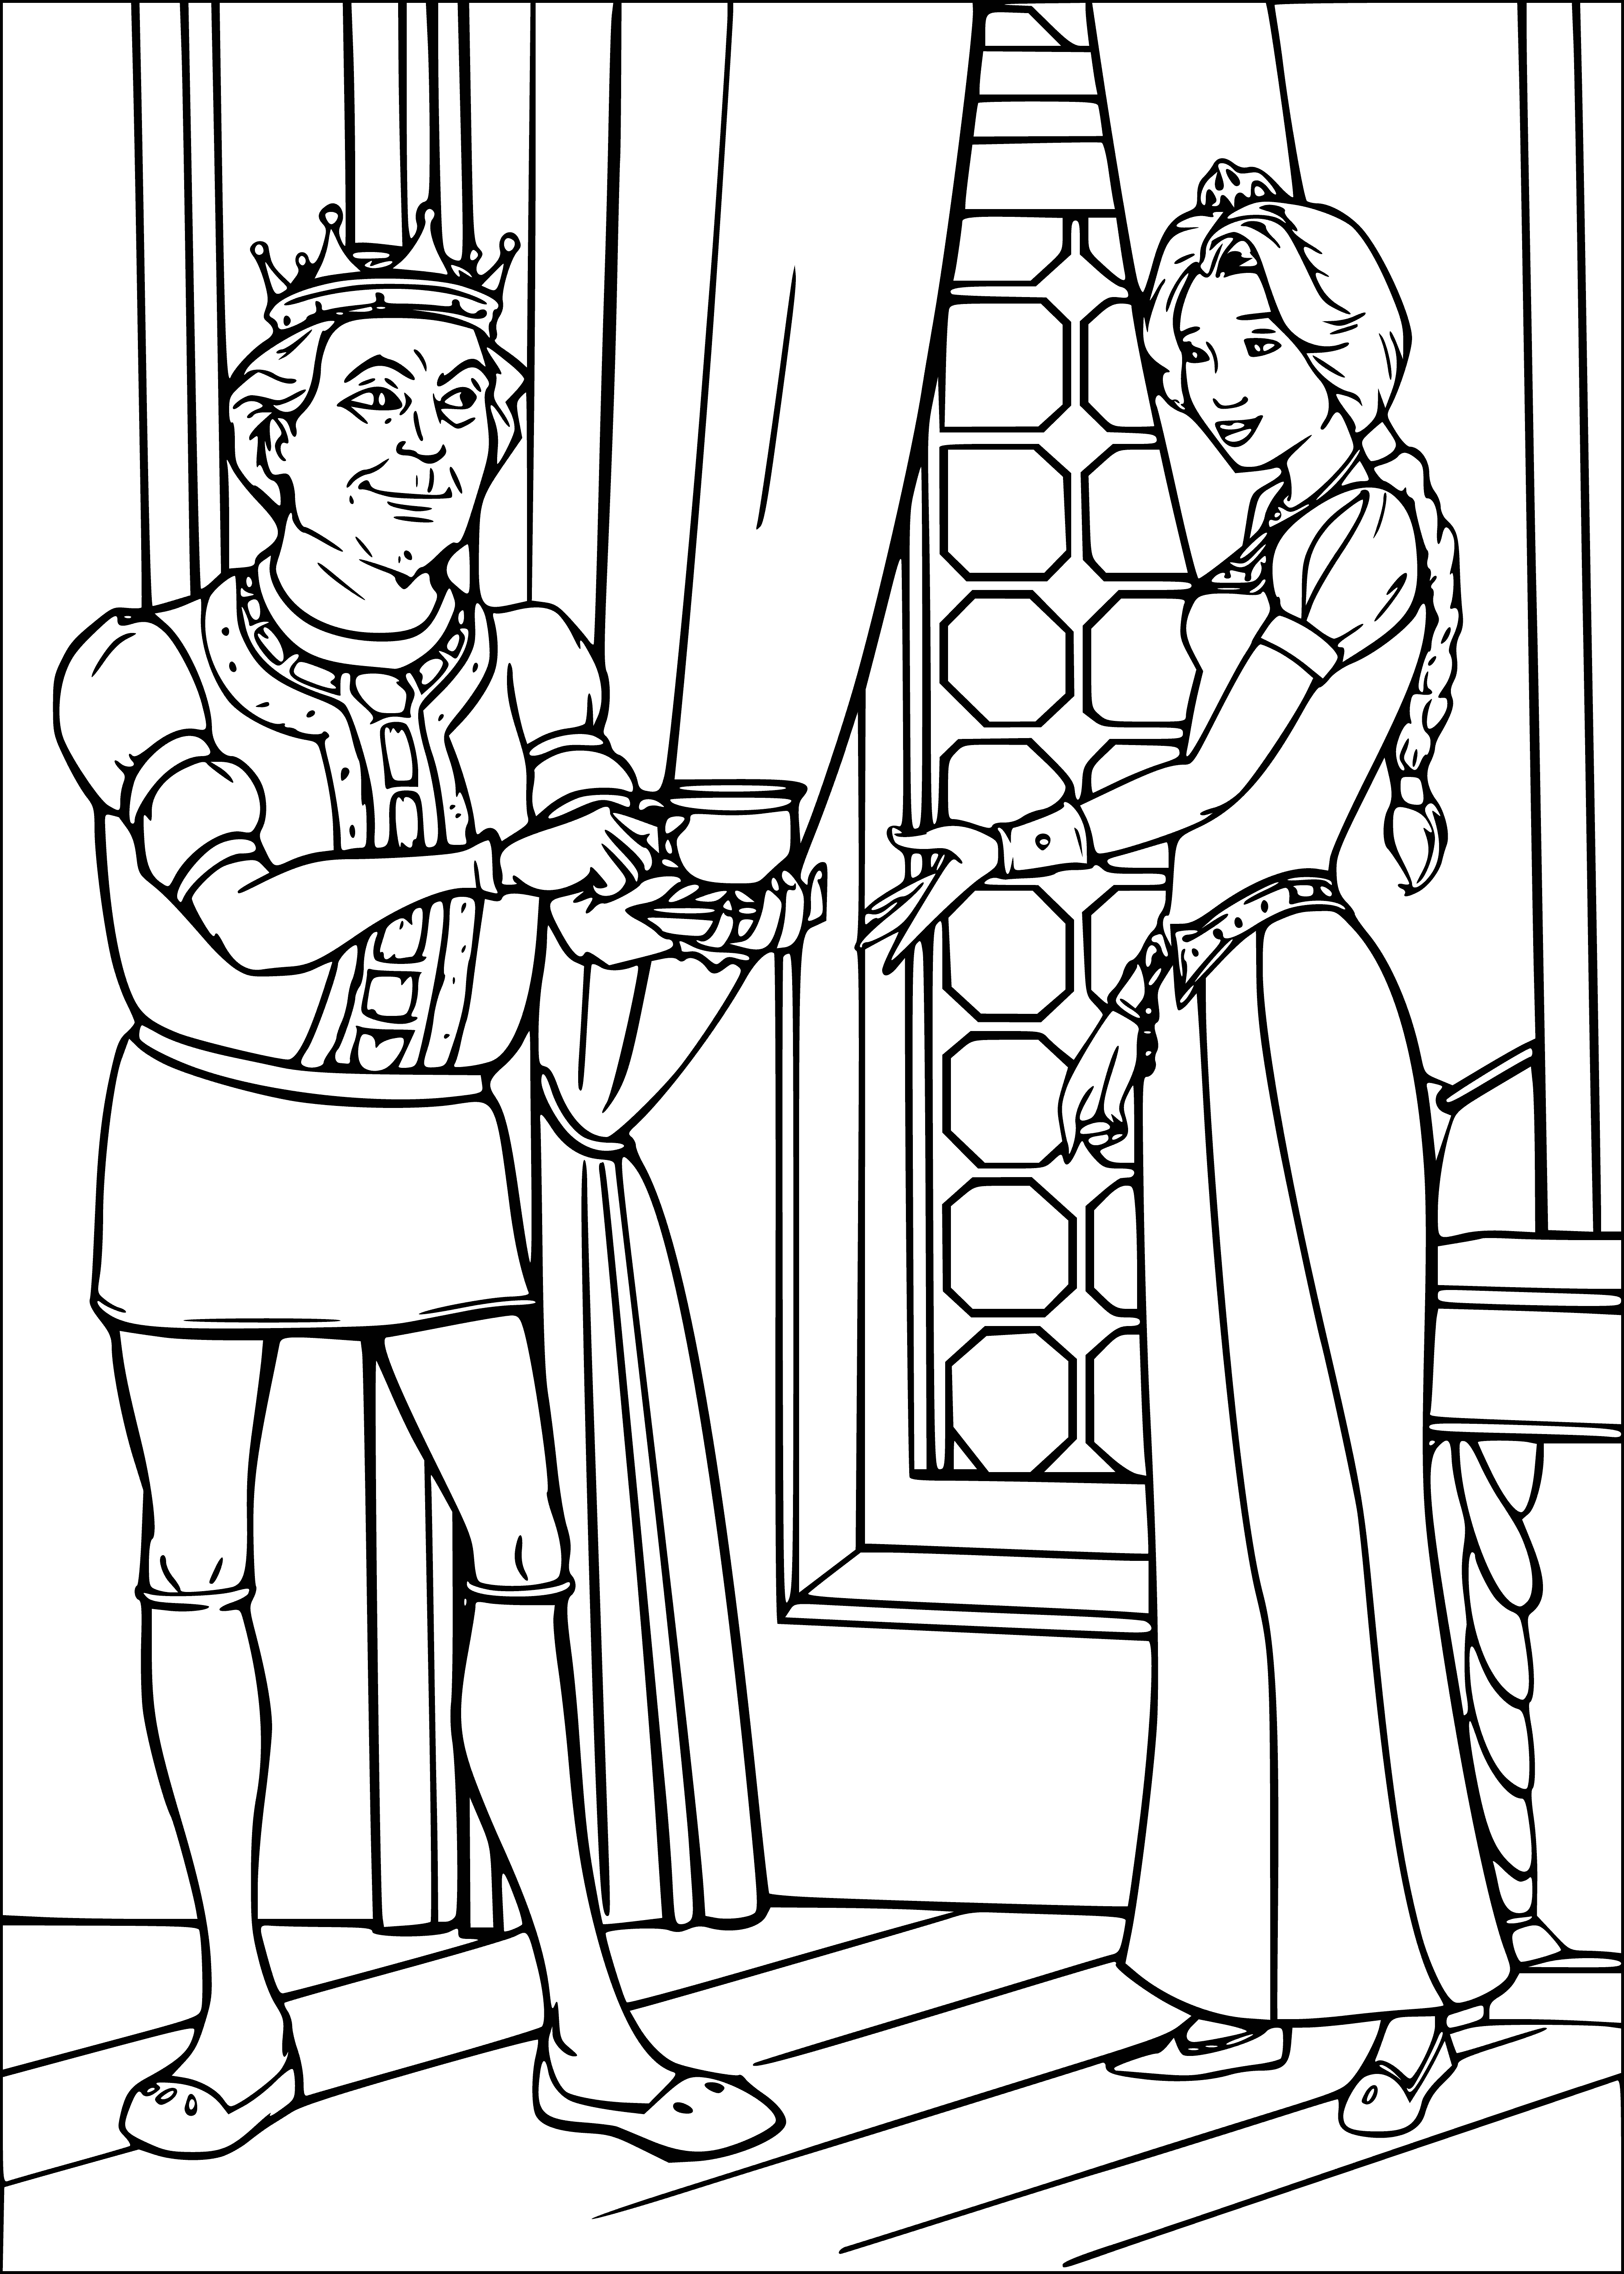 coloring page: Shrek looks content reflecting on his dad while sipping tea and coloring a page.